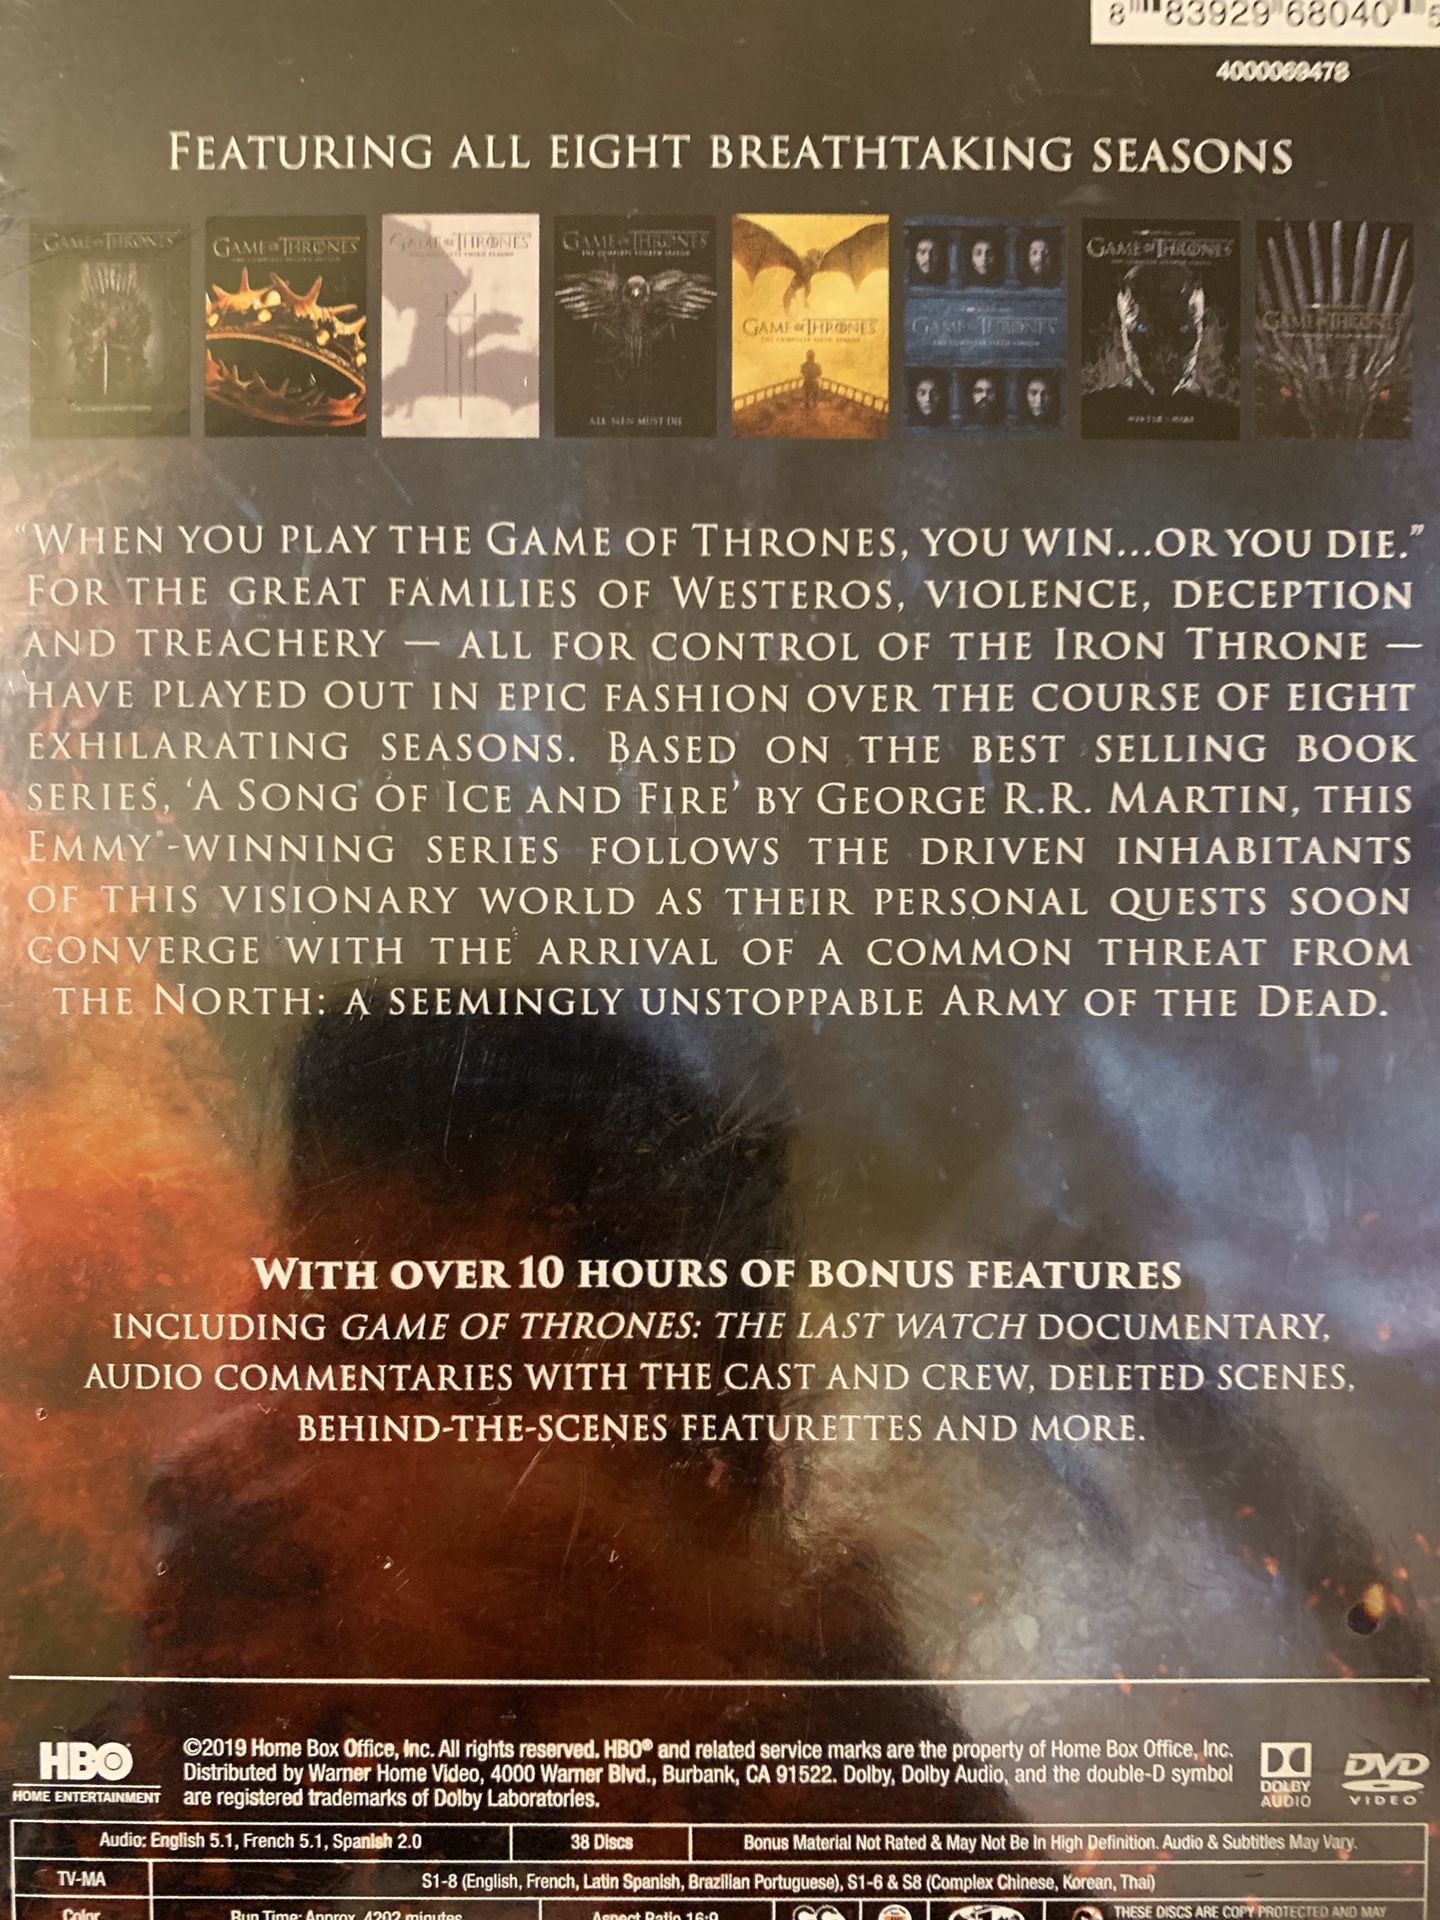 Game of Thrones: The complete Series brand new still in package